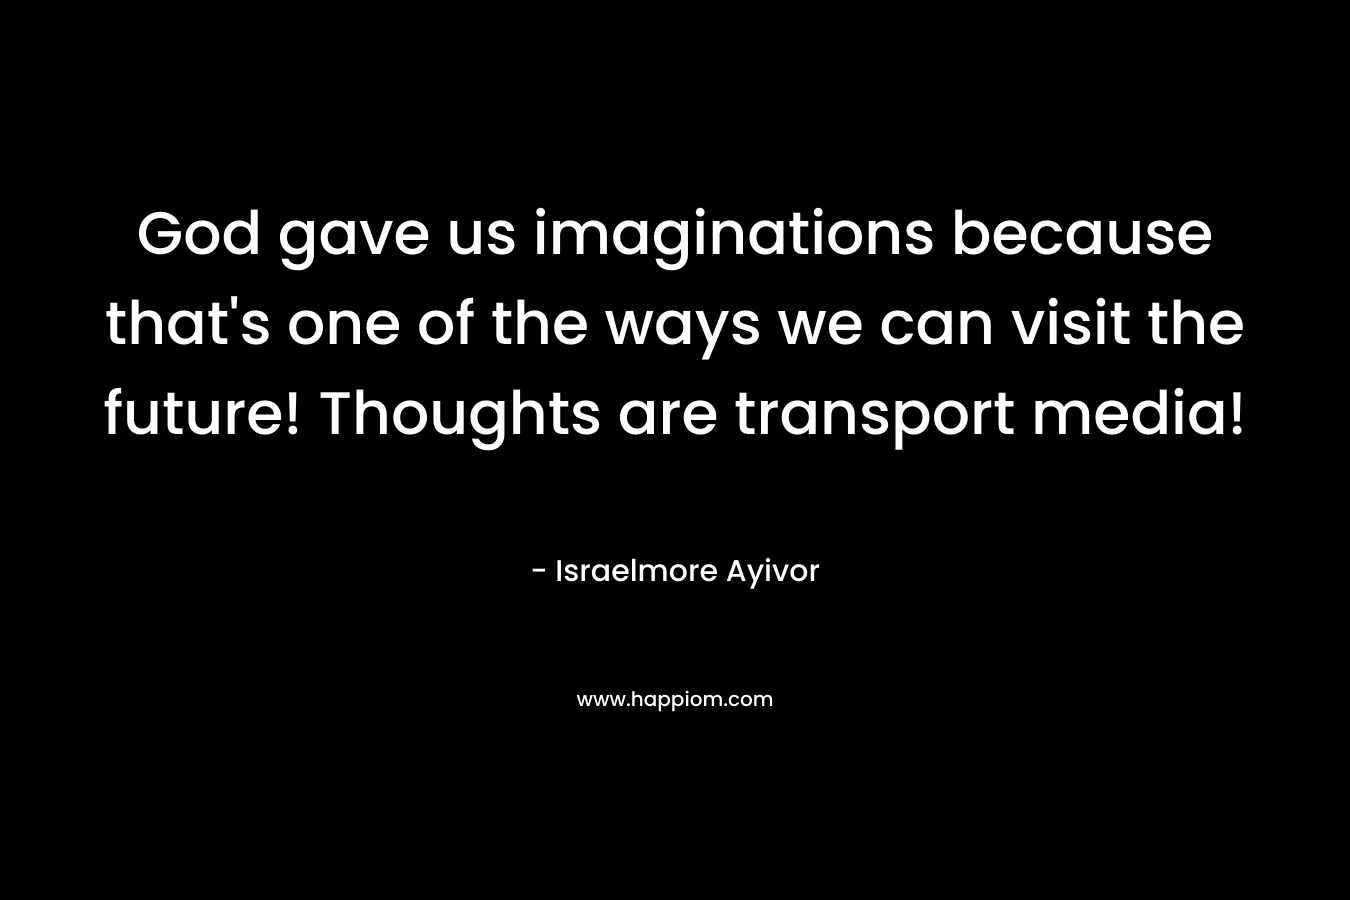 God gave us imaginations because that’s one of the ways we can visit the future! Thoughts are transport media! – Israelmore Ayivor